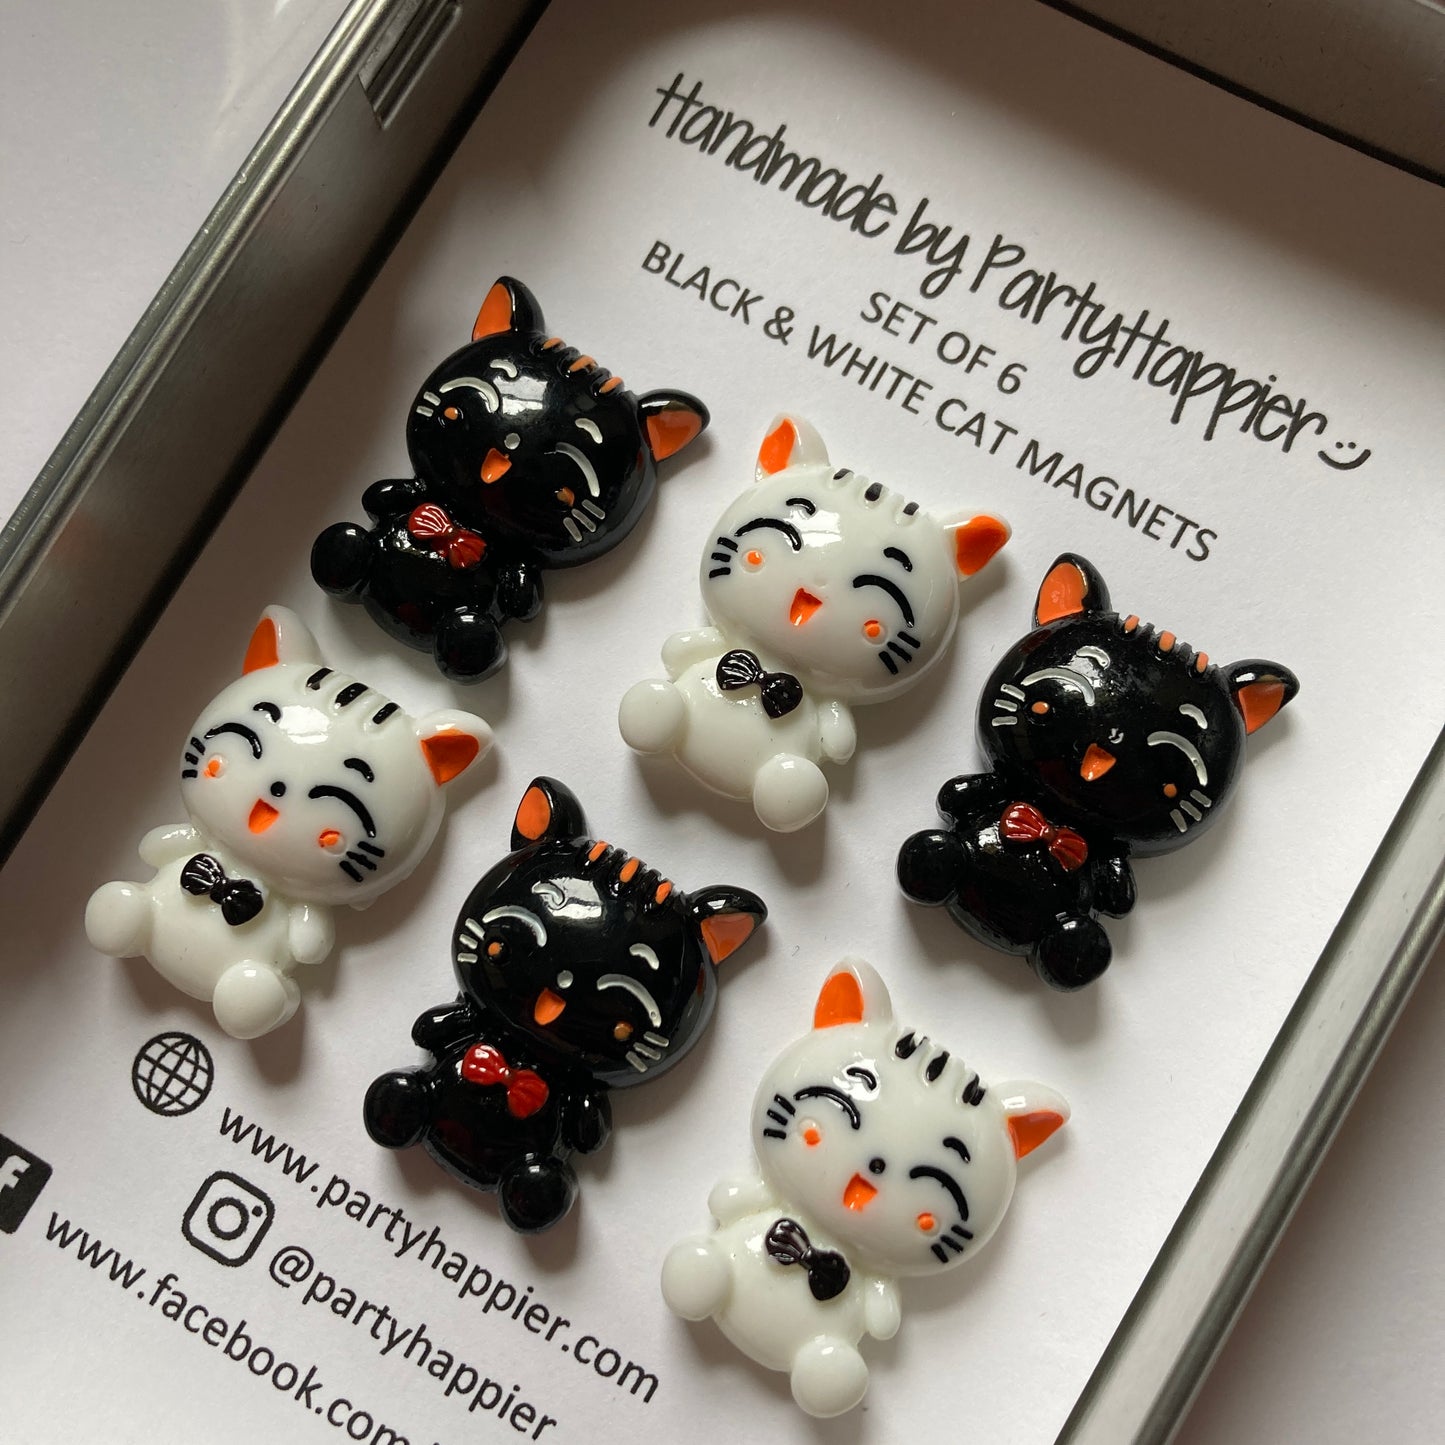 Black and White Cat Magnets